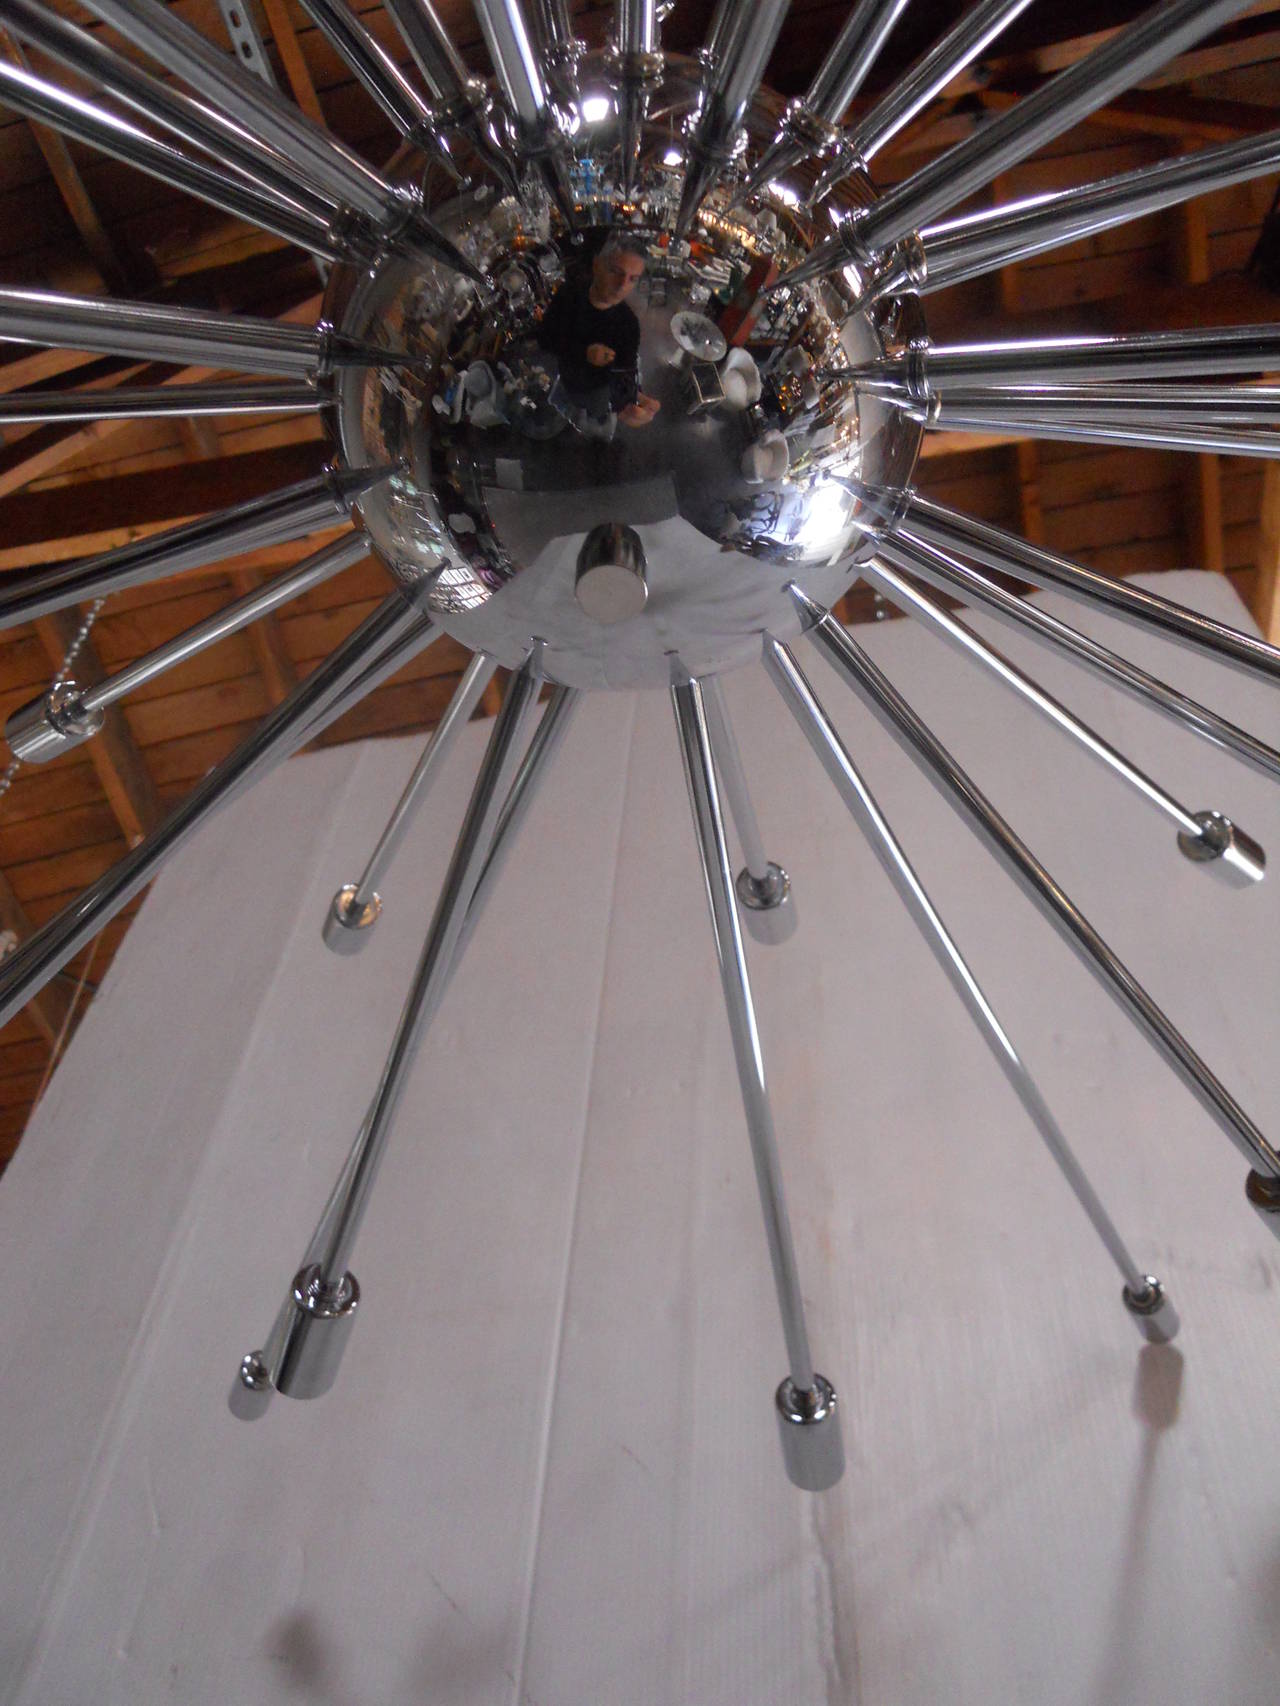 Sleek Sputnik Chandelier
in working condition
the measurements below include just the body of the chandelier with the exisisting pole
The canopy and chain can be provided upon request
36 candelabra socket type light bulbs